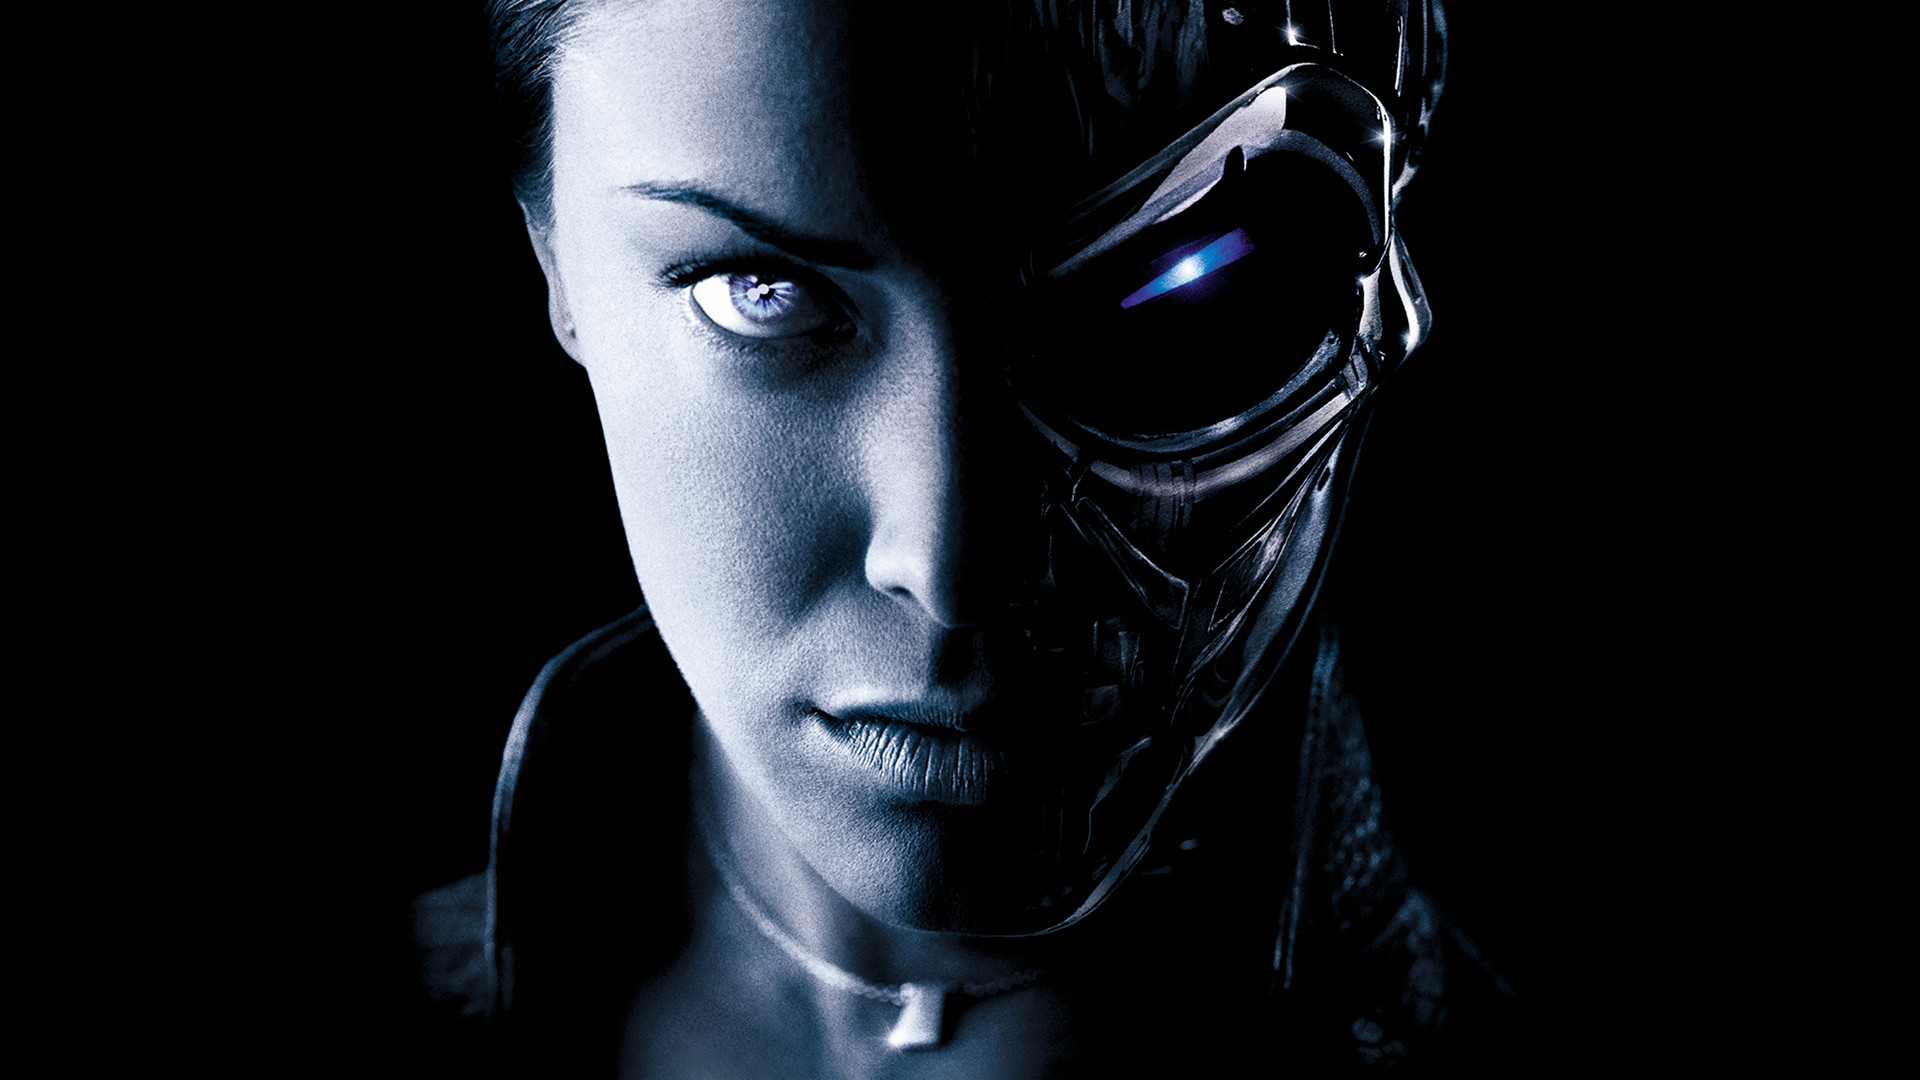 1920x1080 Cyborg Wallpapers, PK686 HDQ Cyborg Pictures (Mobile, PC, IPhone .